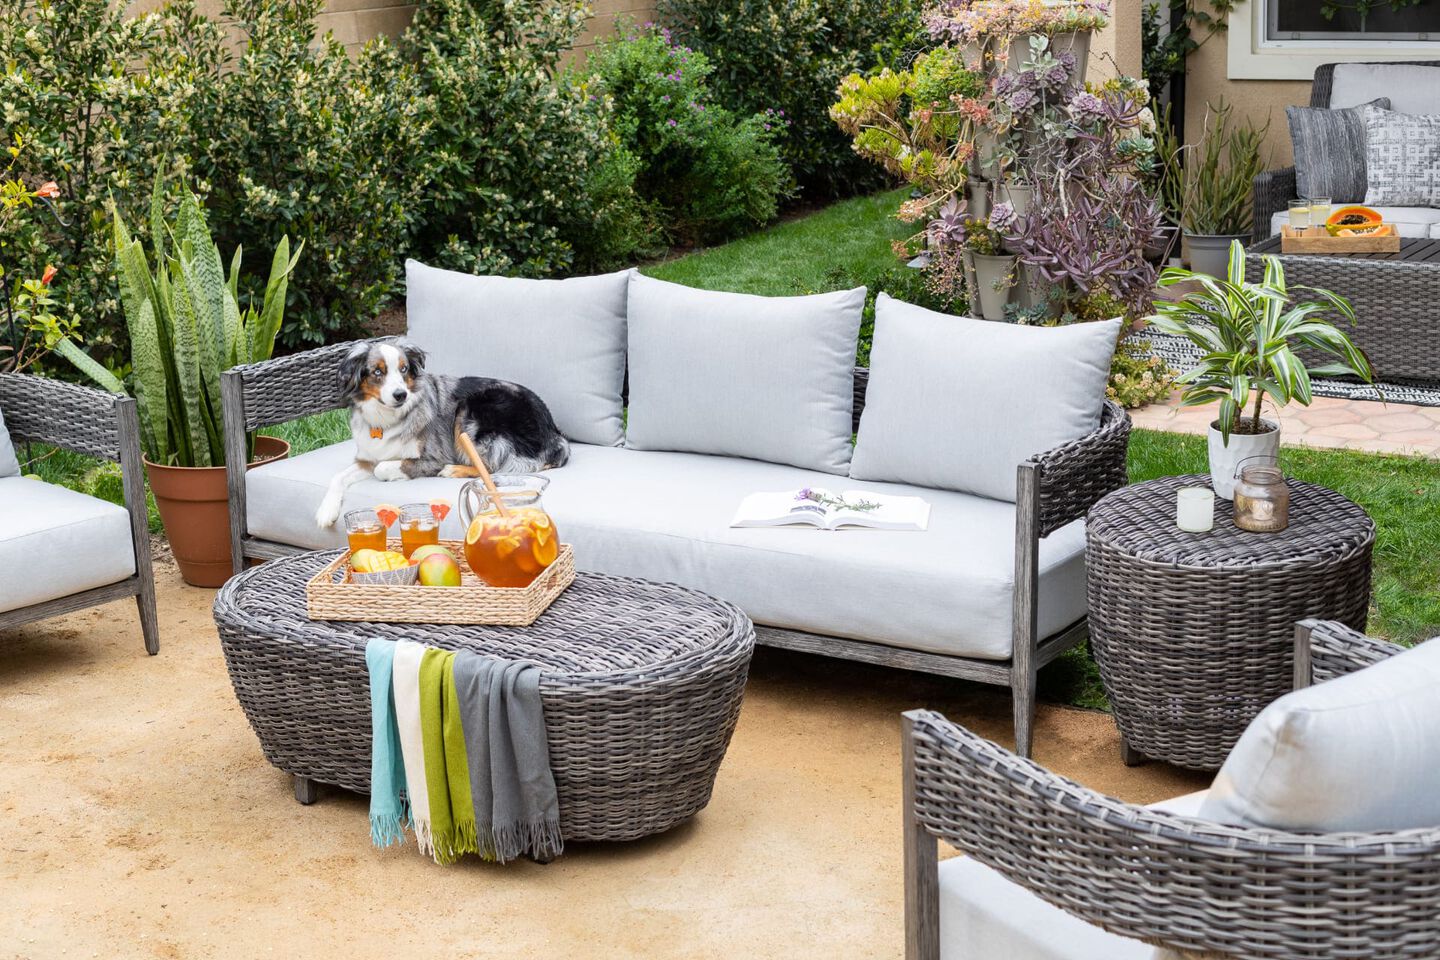 Gathercraft Marana Wicker Outdoor Sofa and Chairs in Modern Transitional Style Patio